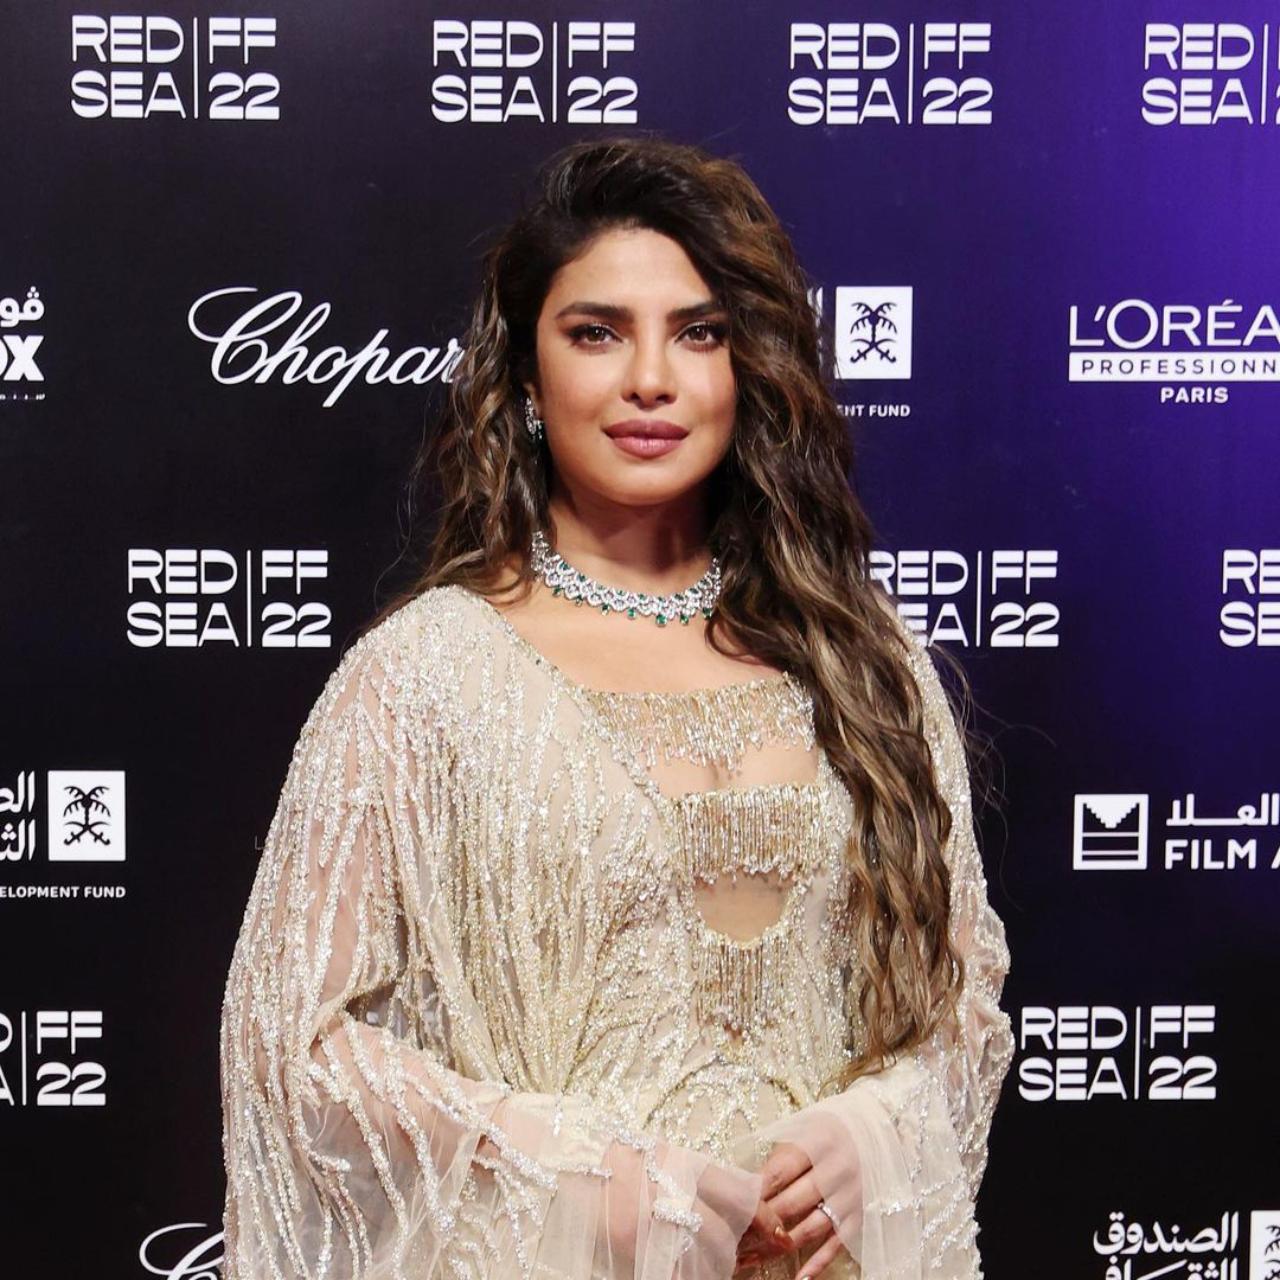 Global star Priyanka Chopra was also seen at the festival on opening night in a shimmery outfit with diamond jewellery. The actress also attended the ‘Women in Cinema’ event at the film festival dressed in a bright yellow satin gown. She paired it with a similarly coloured floor-length cardigan along with a diamond necklace and a glimmering bracelet